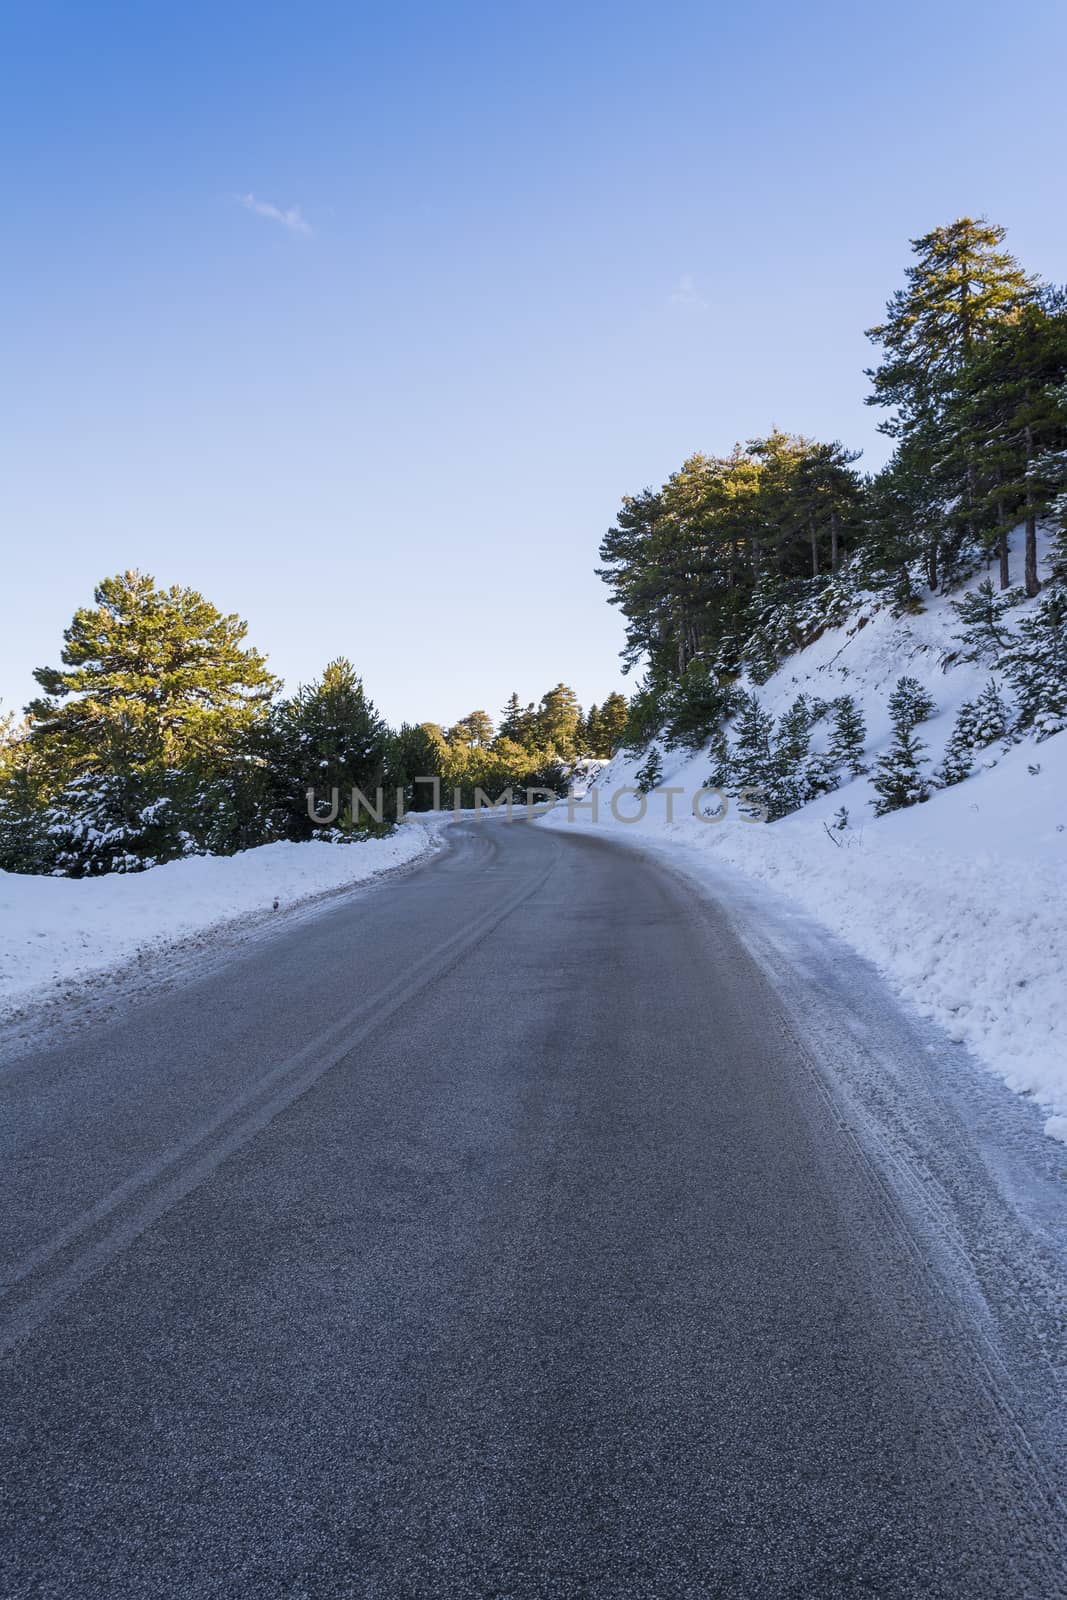 Road in Ziria mountain on a winter day, Korinthia, South Peloponnese, Greece. Ziria is one of the snowiest mountains in Peloponnese (2,374m).